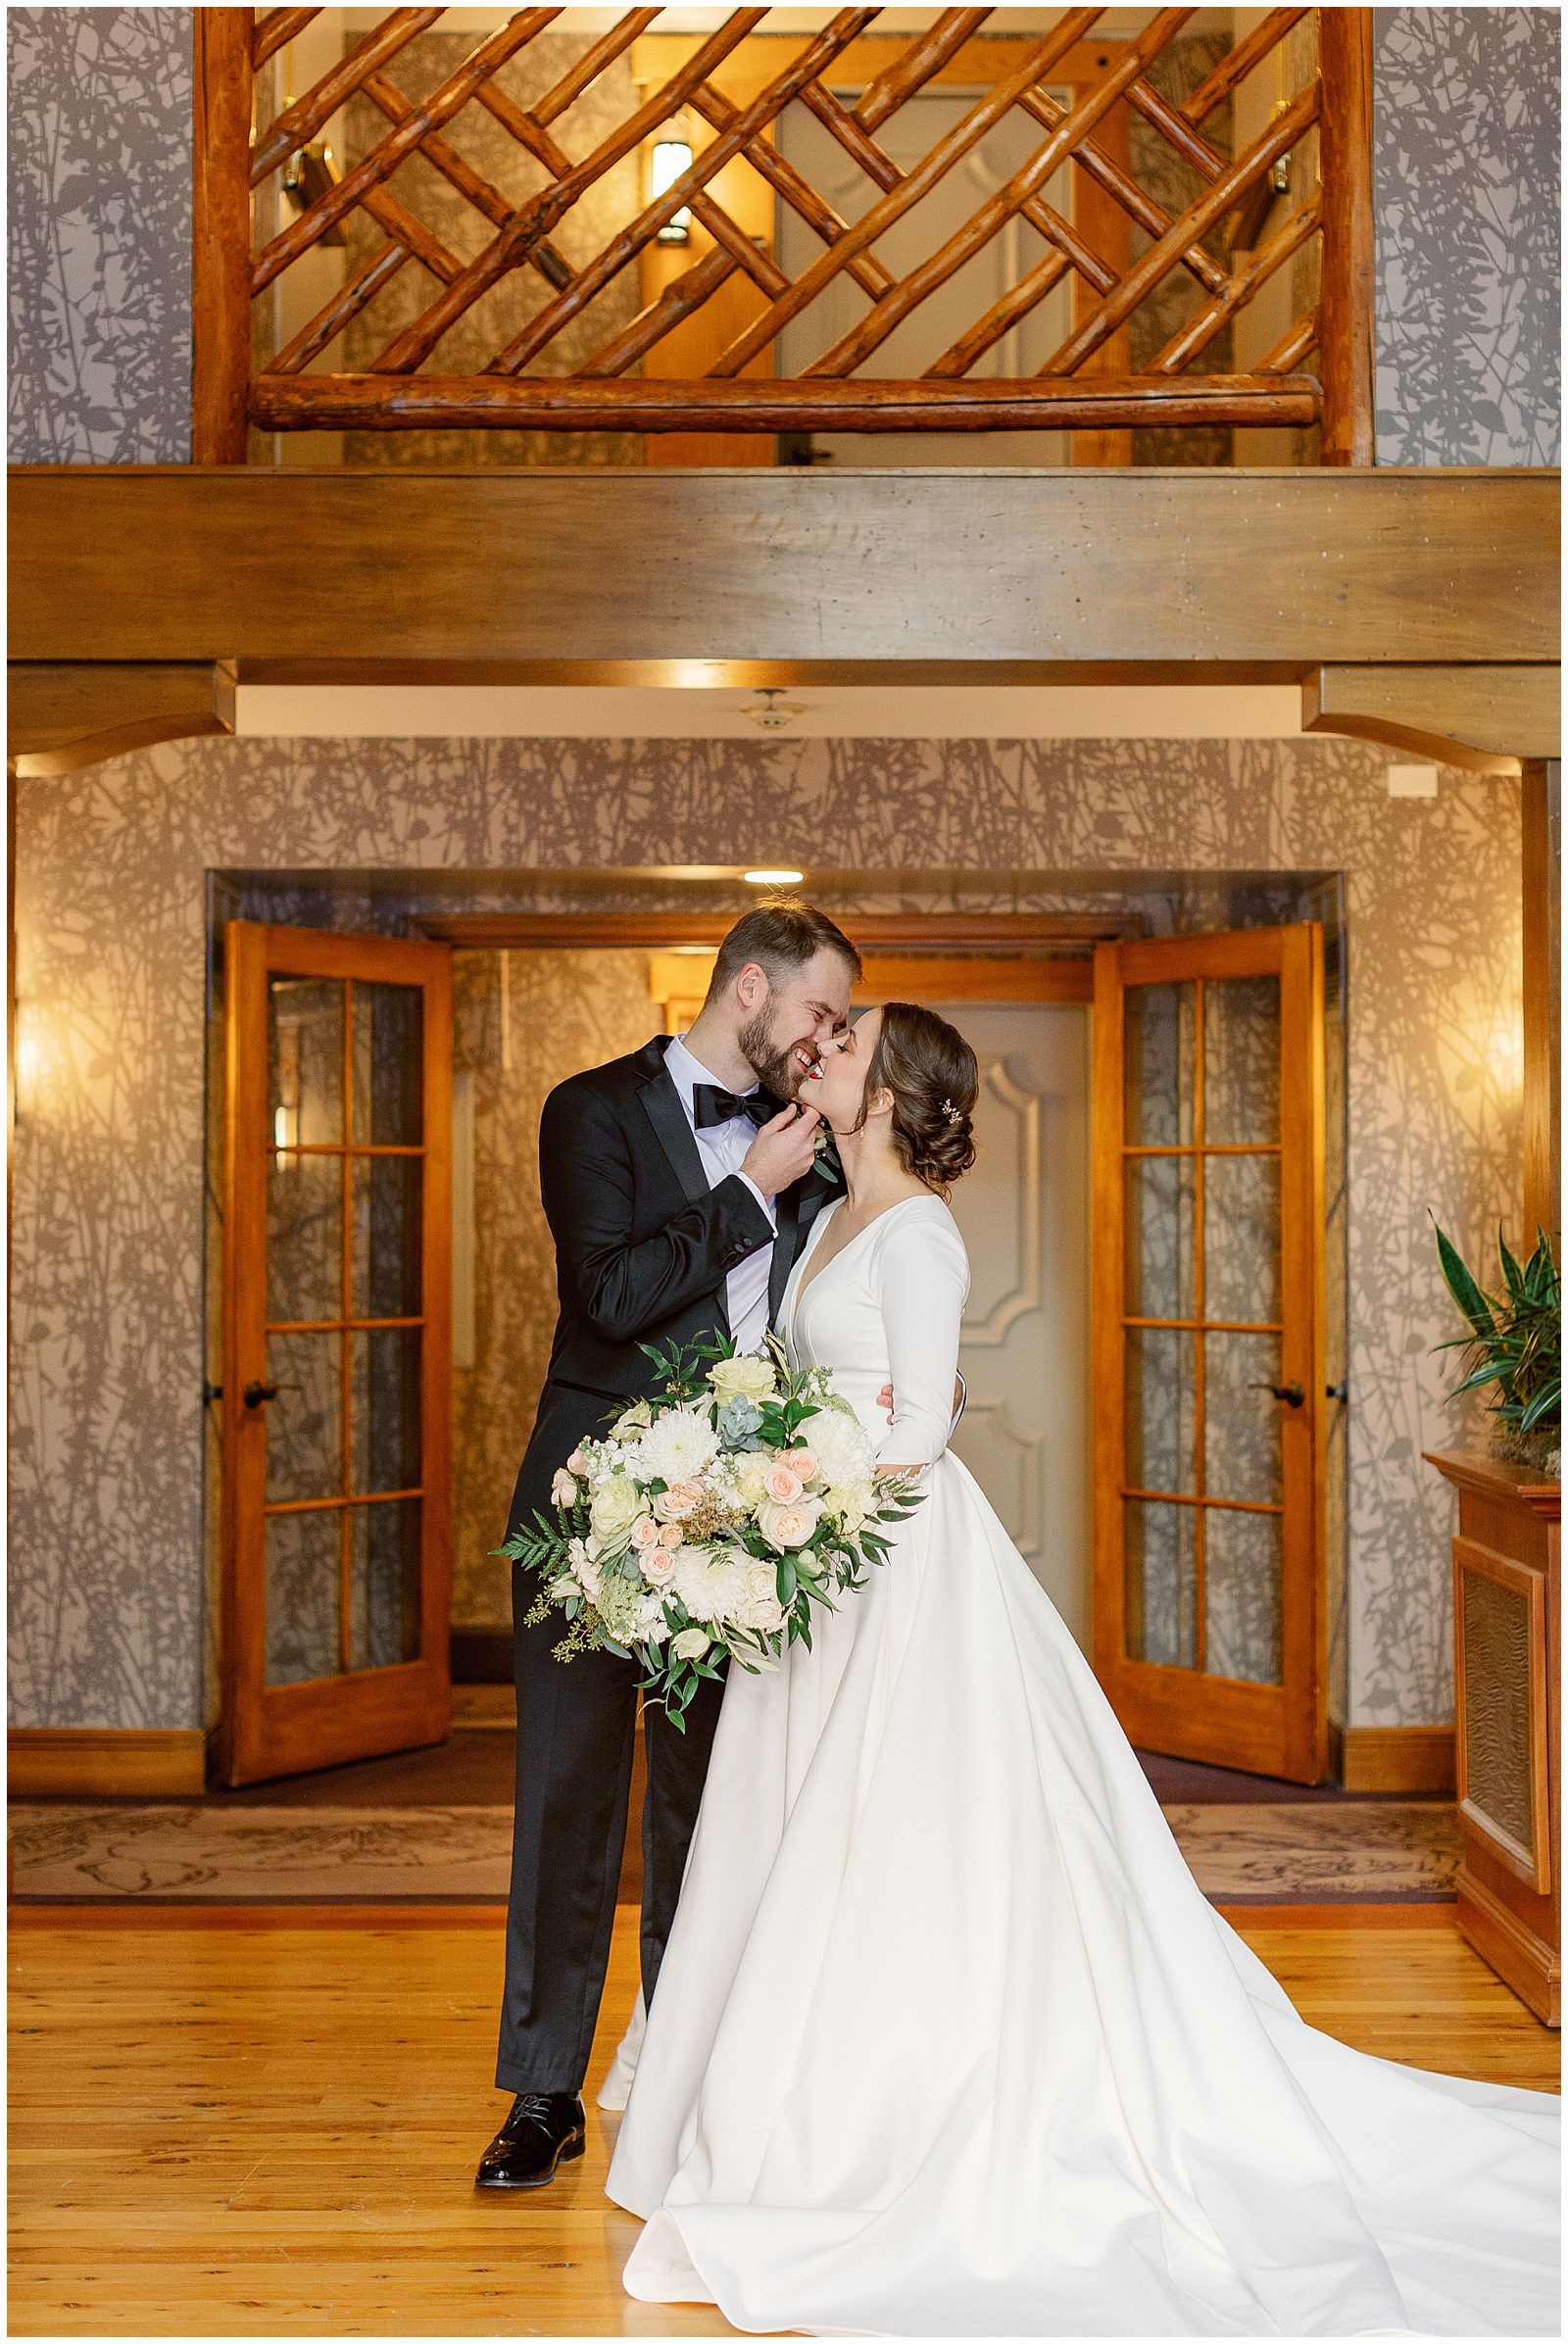 Bride and Groom Portraits at Winter Shore Lodge Wedding in McCall, Idaho